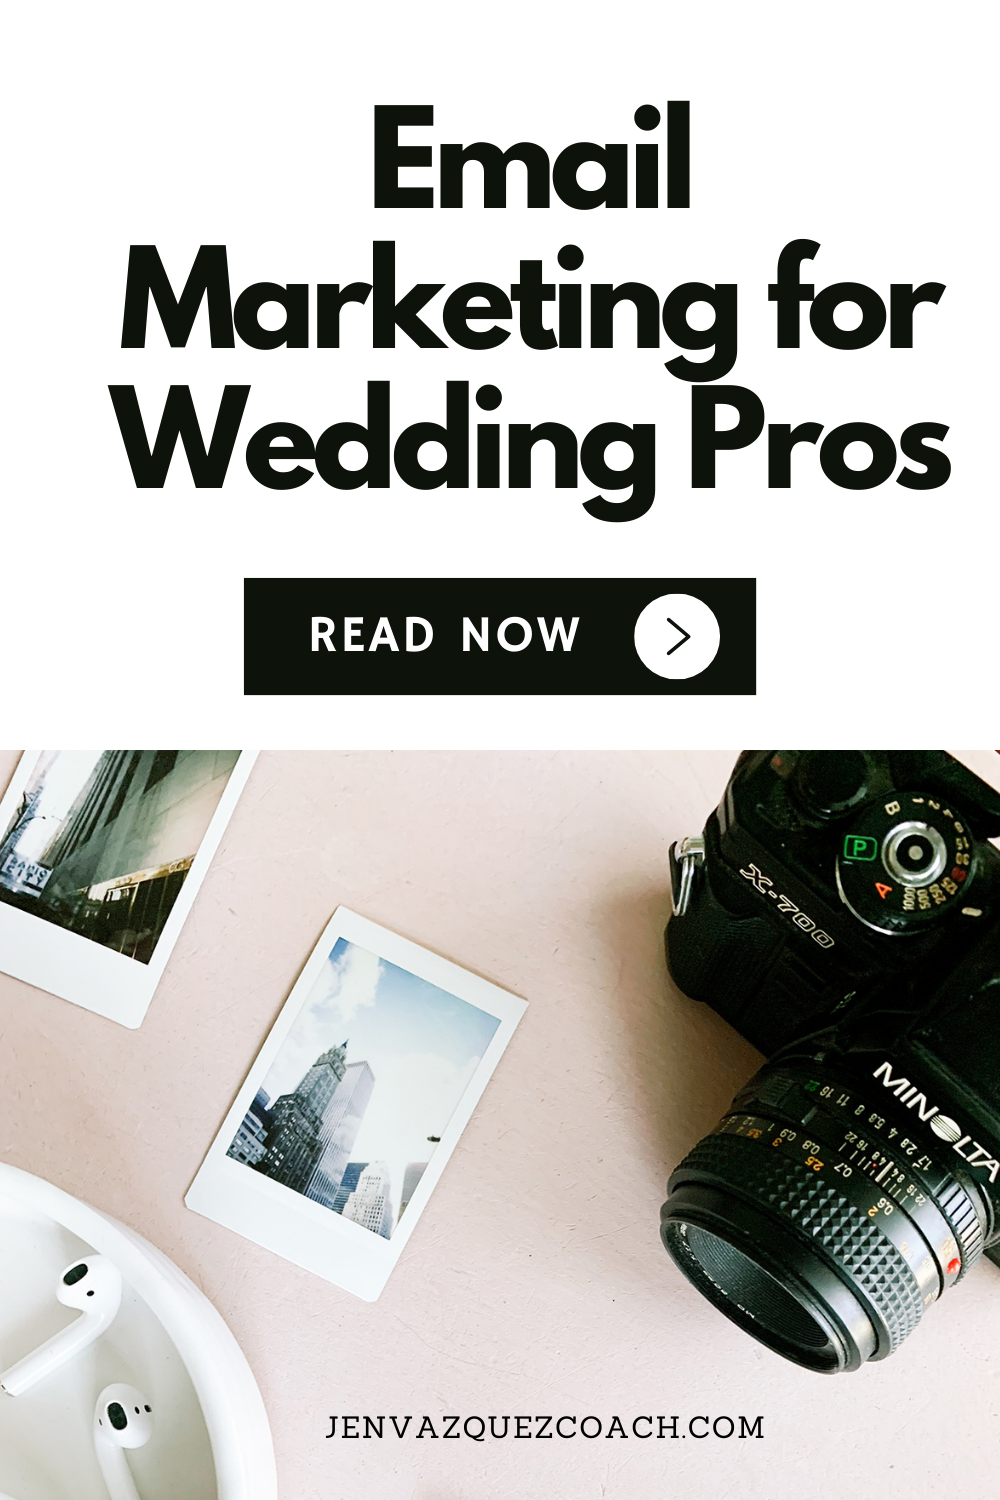 Email marketing for Wedding Pros 